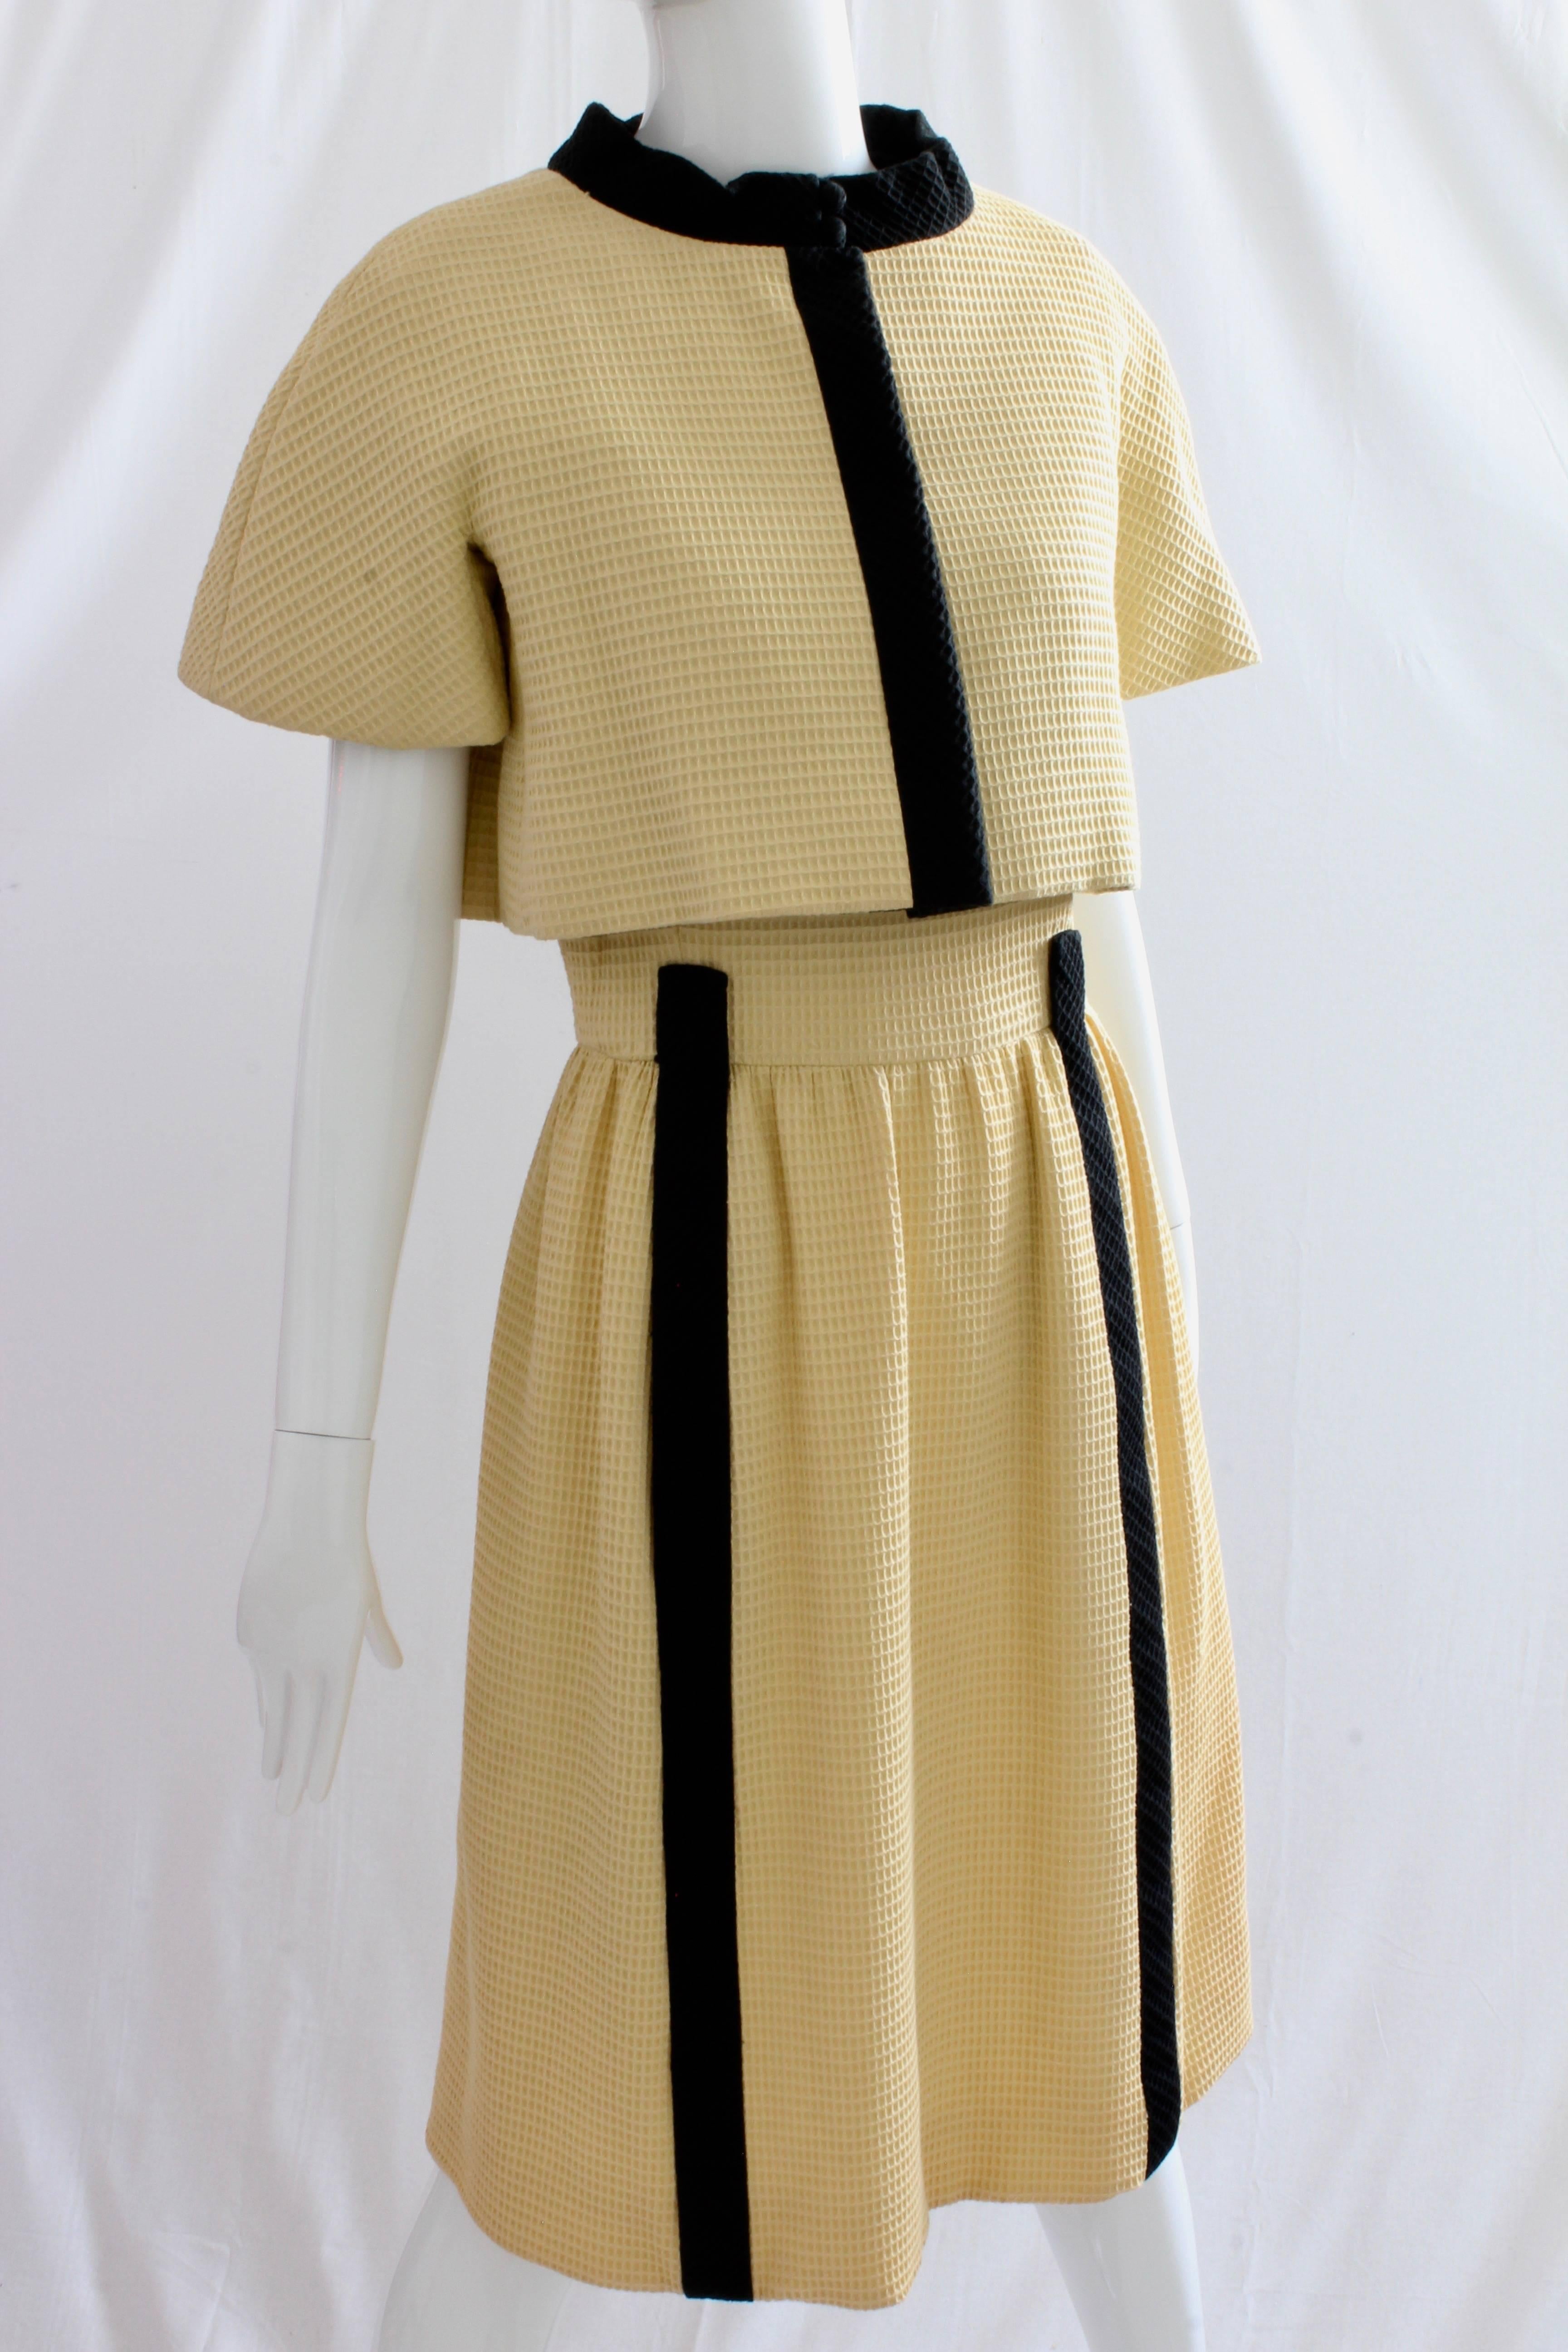 Women's or Men's 60s Chester Weinberg Jacket and Dress Ensemble 2pc Set Yellow Honeycomb Fabric S